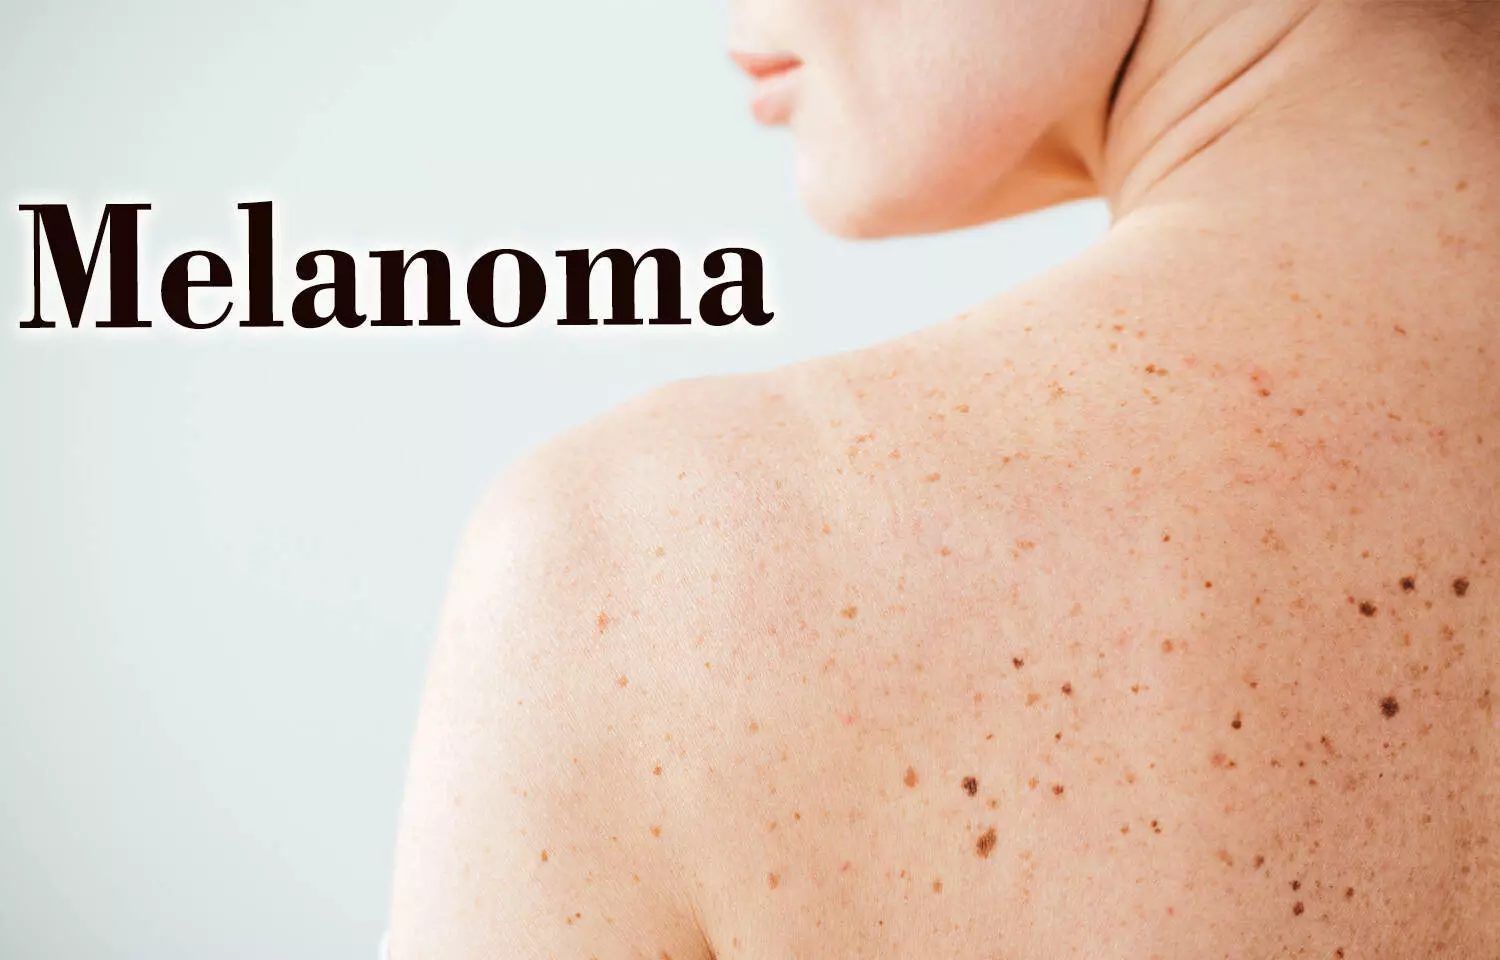 Dietary fiber improves outcomes for melanoma patients on immunotherapy, research shows